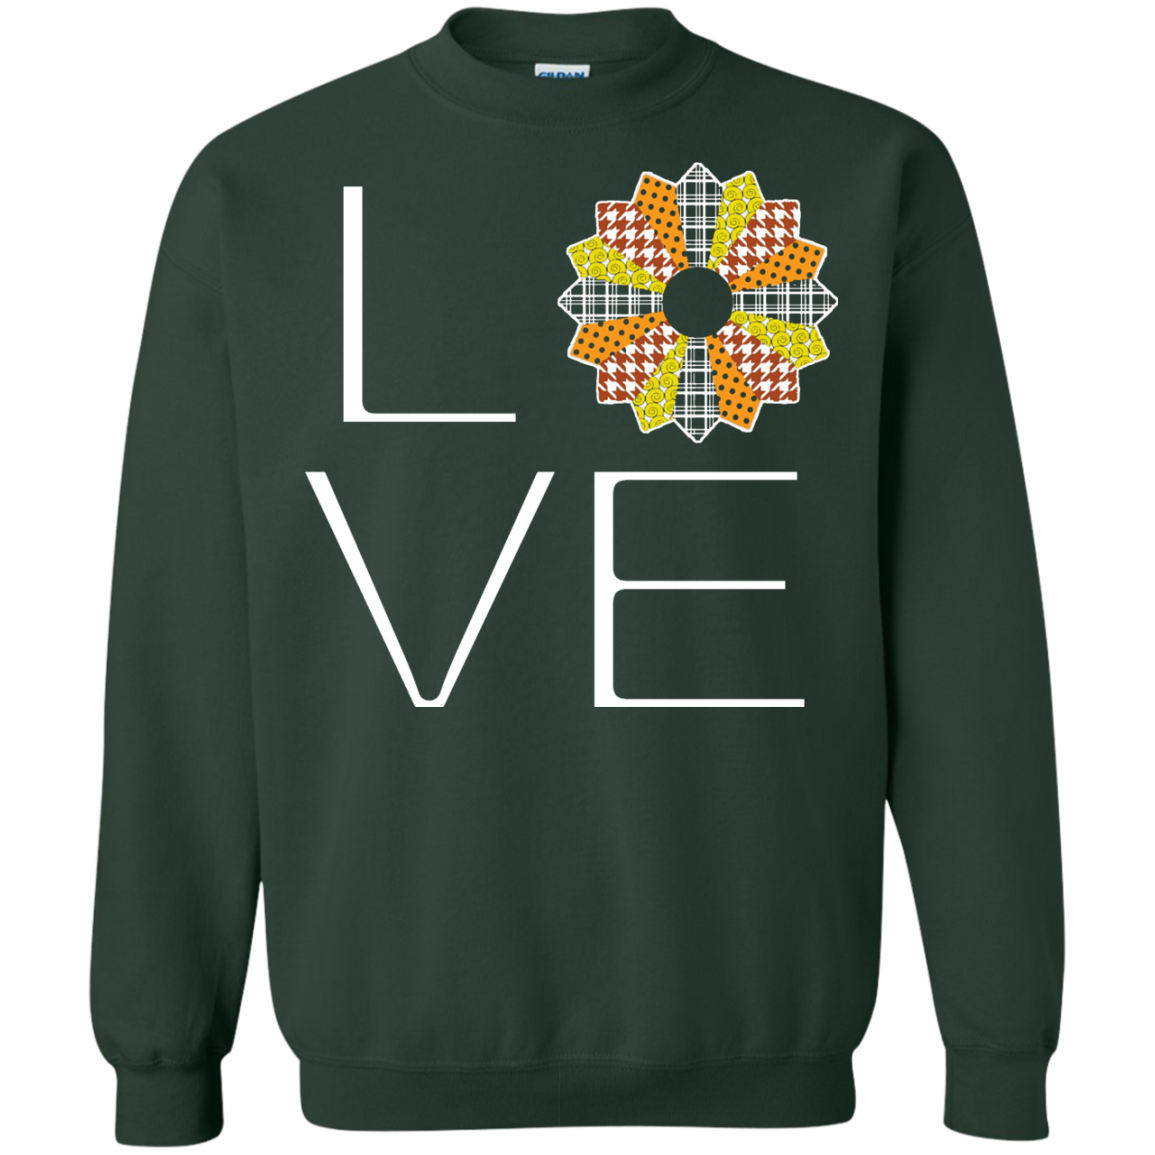 LOVE Quilting (Fall Colors) Crewneck Sweatshirts - Crafter4Life - 6